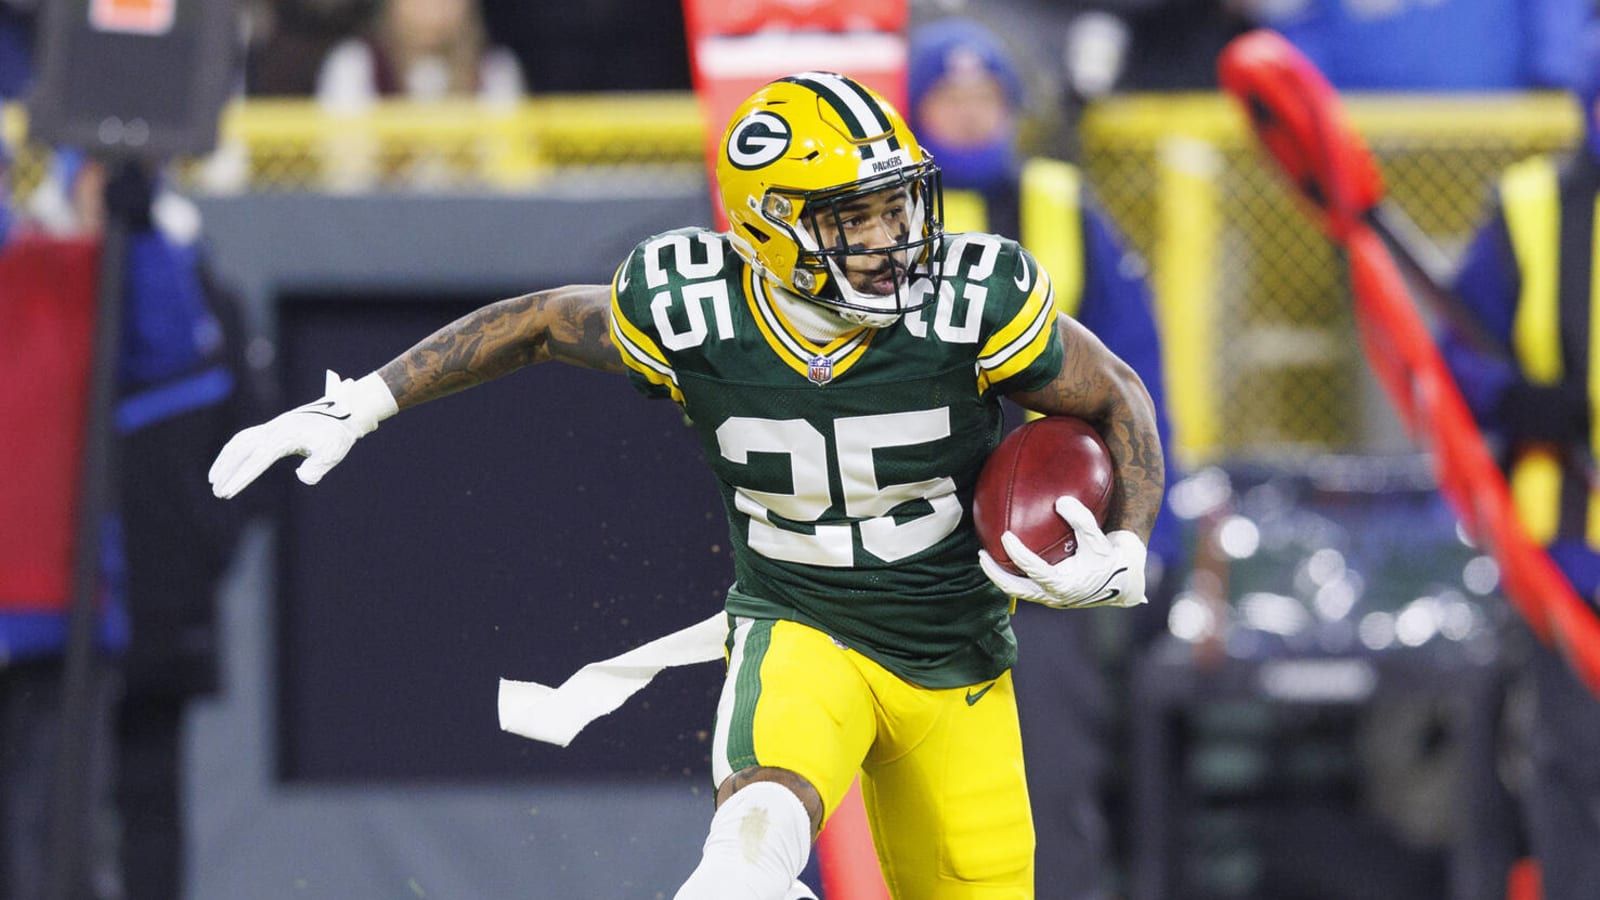 Amidst Rodgers saga, the Packers' biggest offseason move was re-signing All-Pro CB